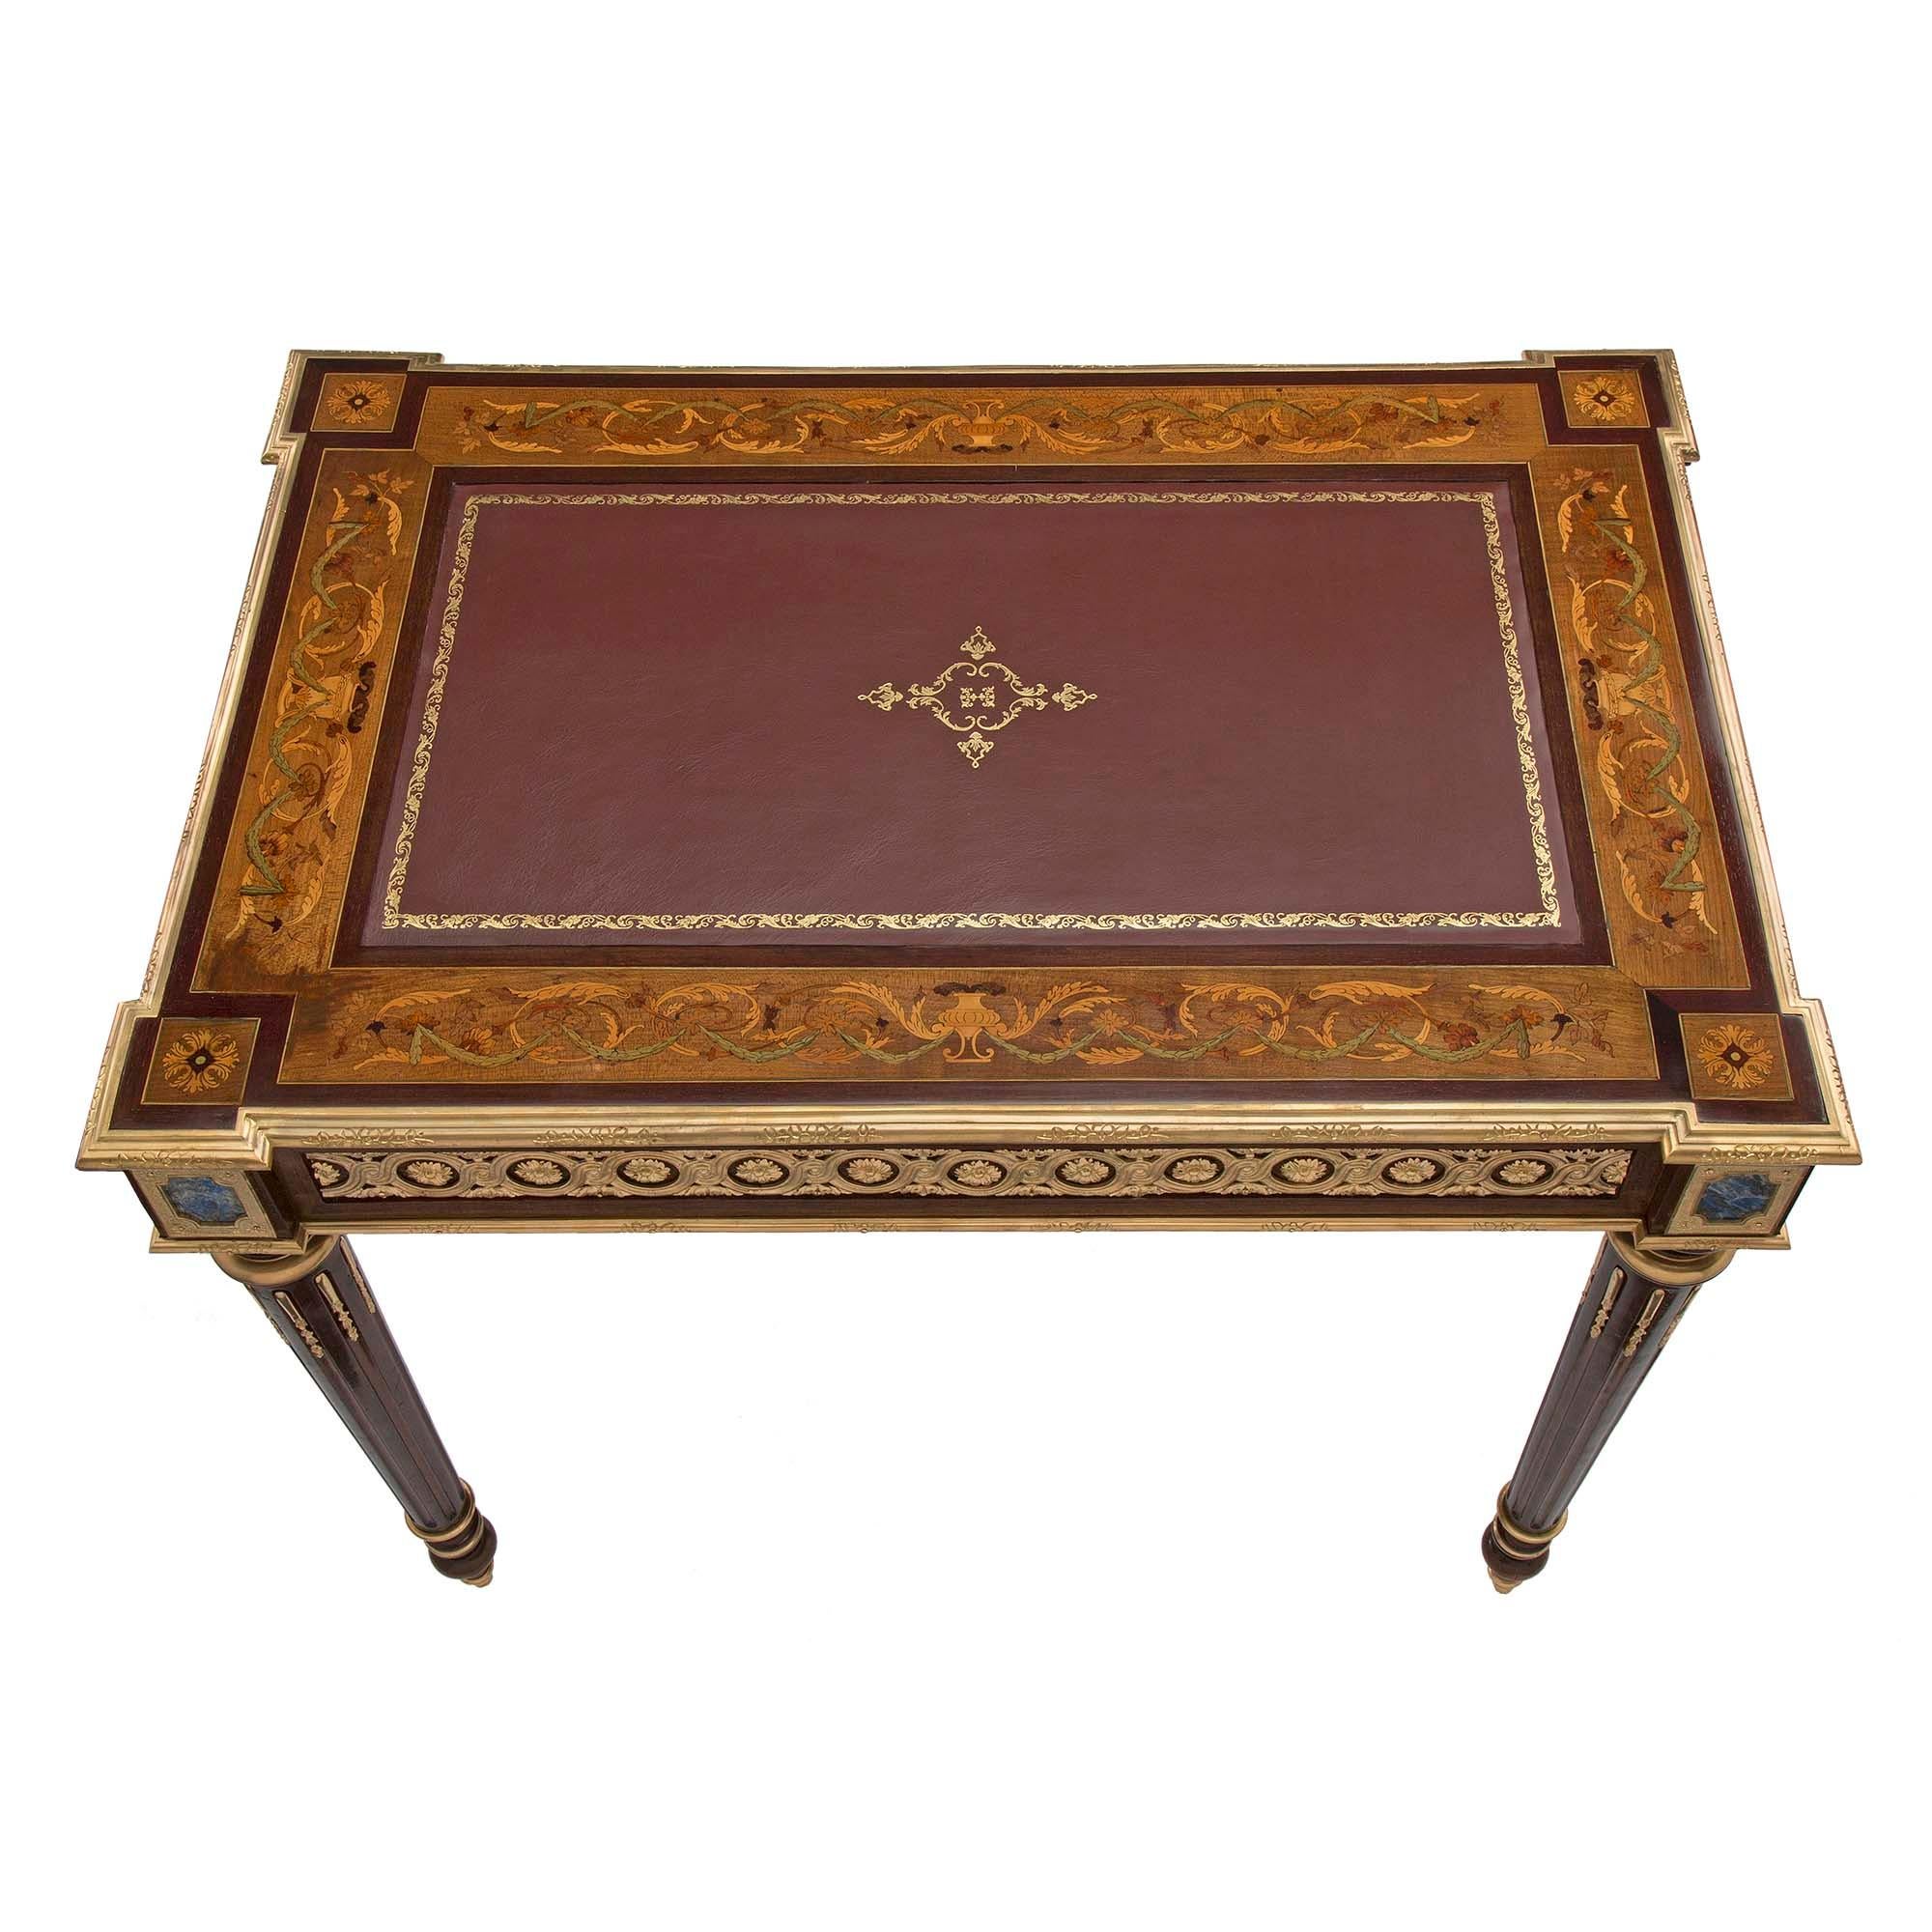 A superb and unique French 19th century Louis XVI st. mahogany and ormolu desk. The desk is raised on tapered fluted legs with ormolu chandelles and topie feet with ormolu sabots. At the impressive apron is a single drawer which has a secret